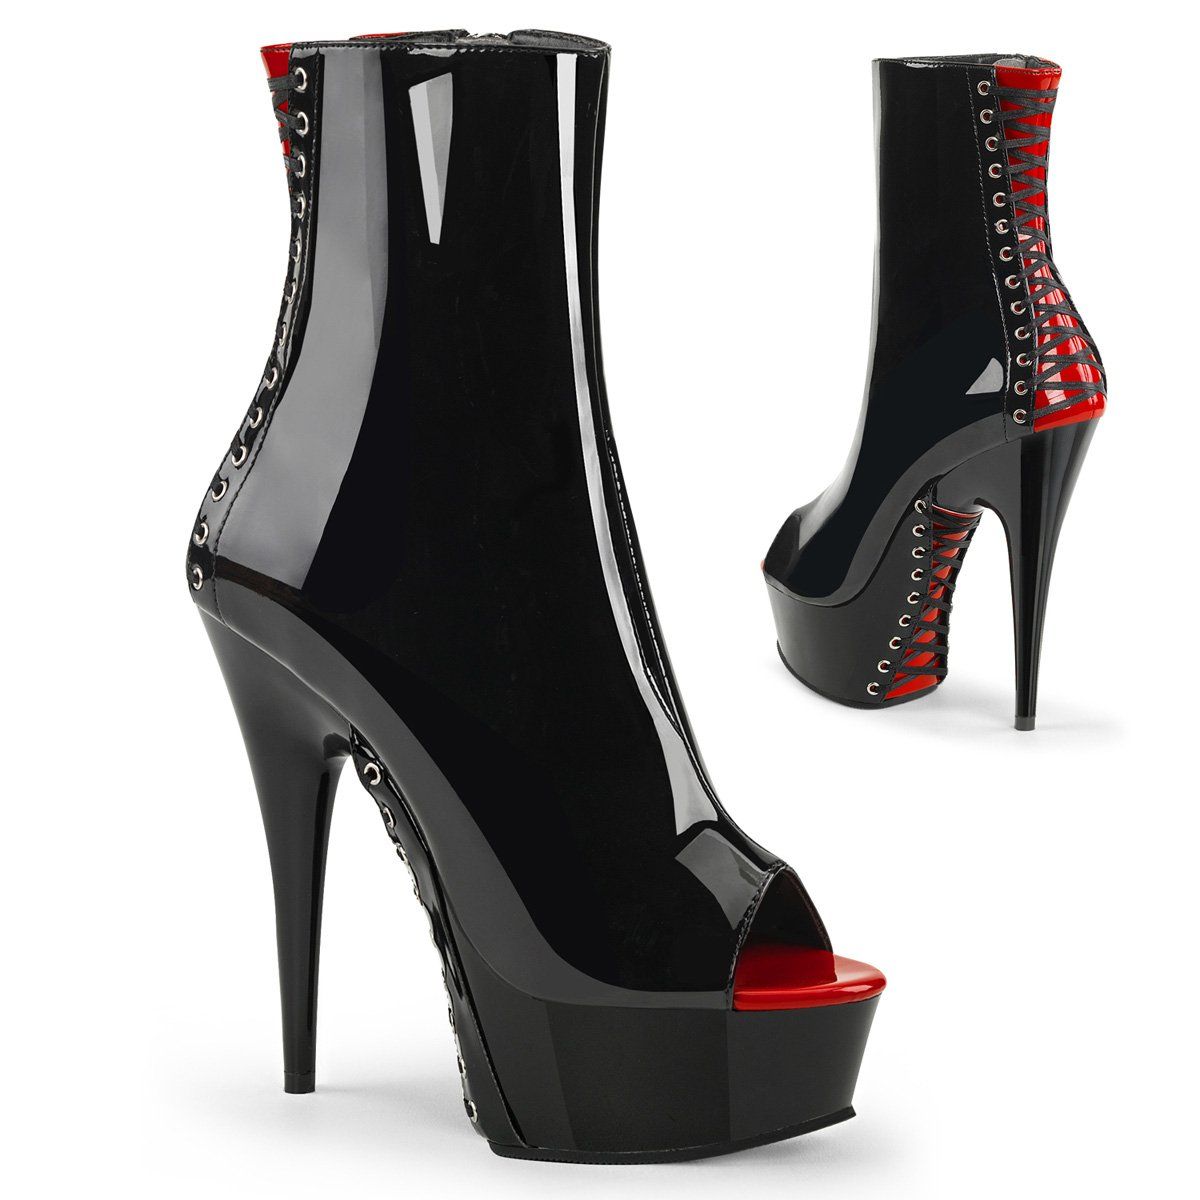 DELIGHT-1025 Black-Red Patent/Black Ankle Boot Pleaser